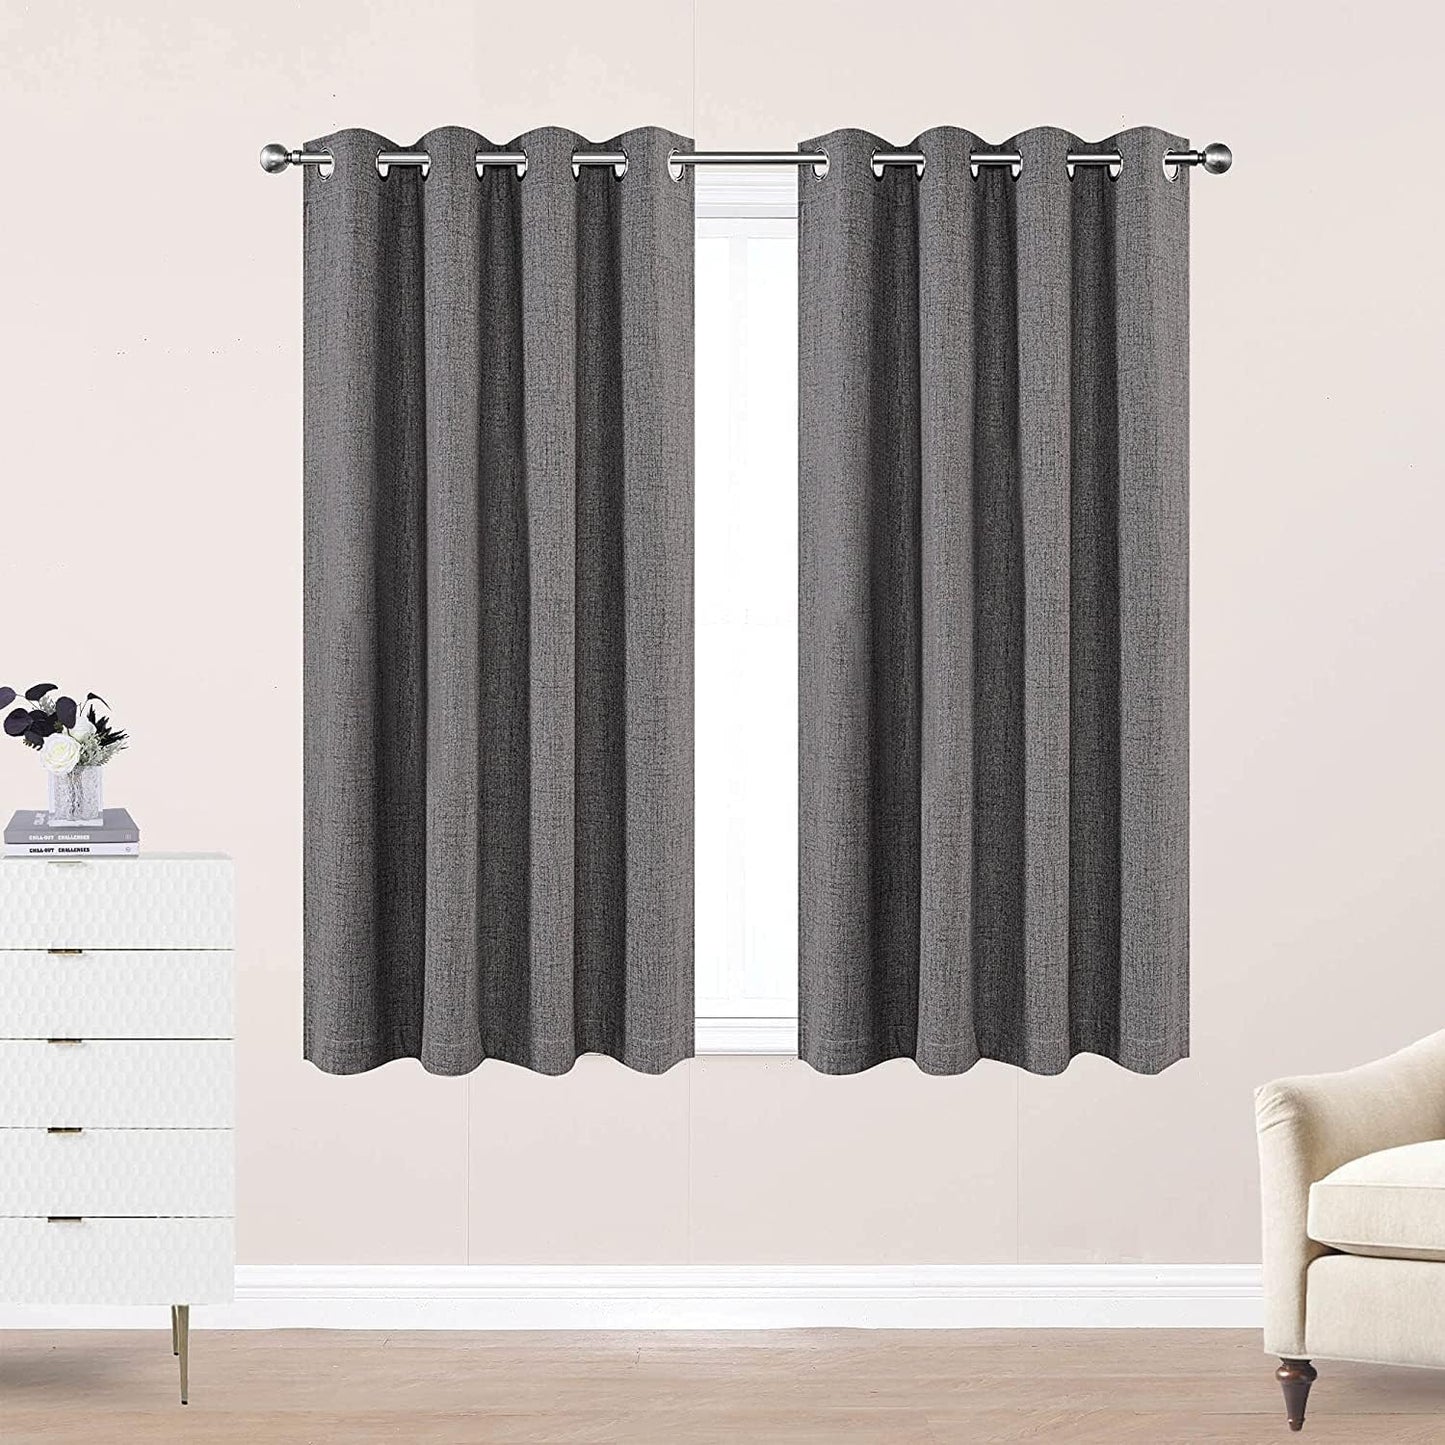 CUCRAF Full Blackout Window Curtains 84 Inches Long,Faux Linen Look Thermal Insulated Grommet Drapes Panels for Bedroom Living Room,Set of 2(52 X 84 Inches, Light Khaki)  CUCRAF Grey 52 X 72 Inches 